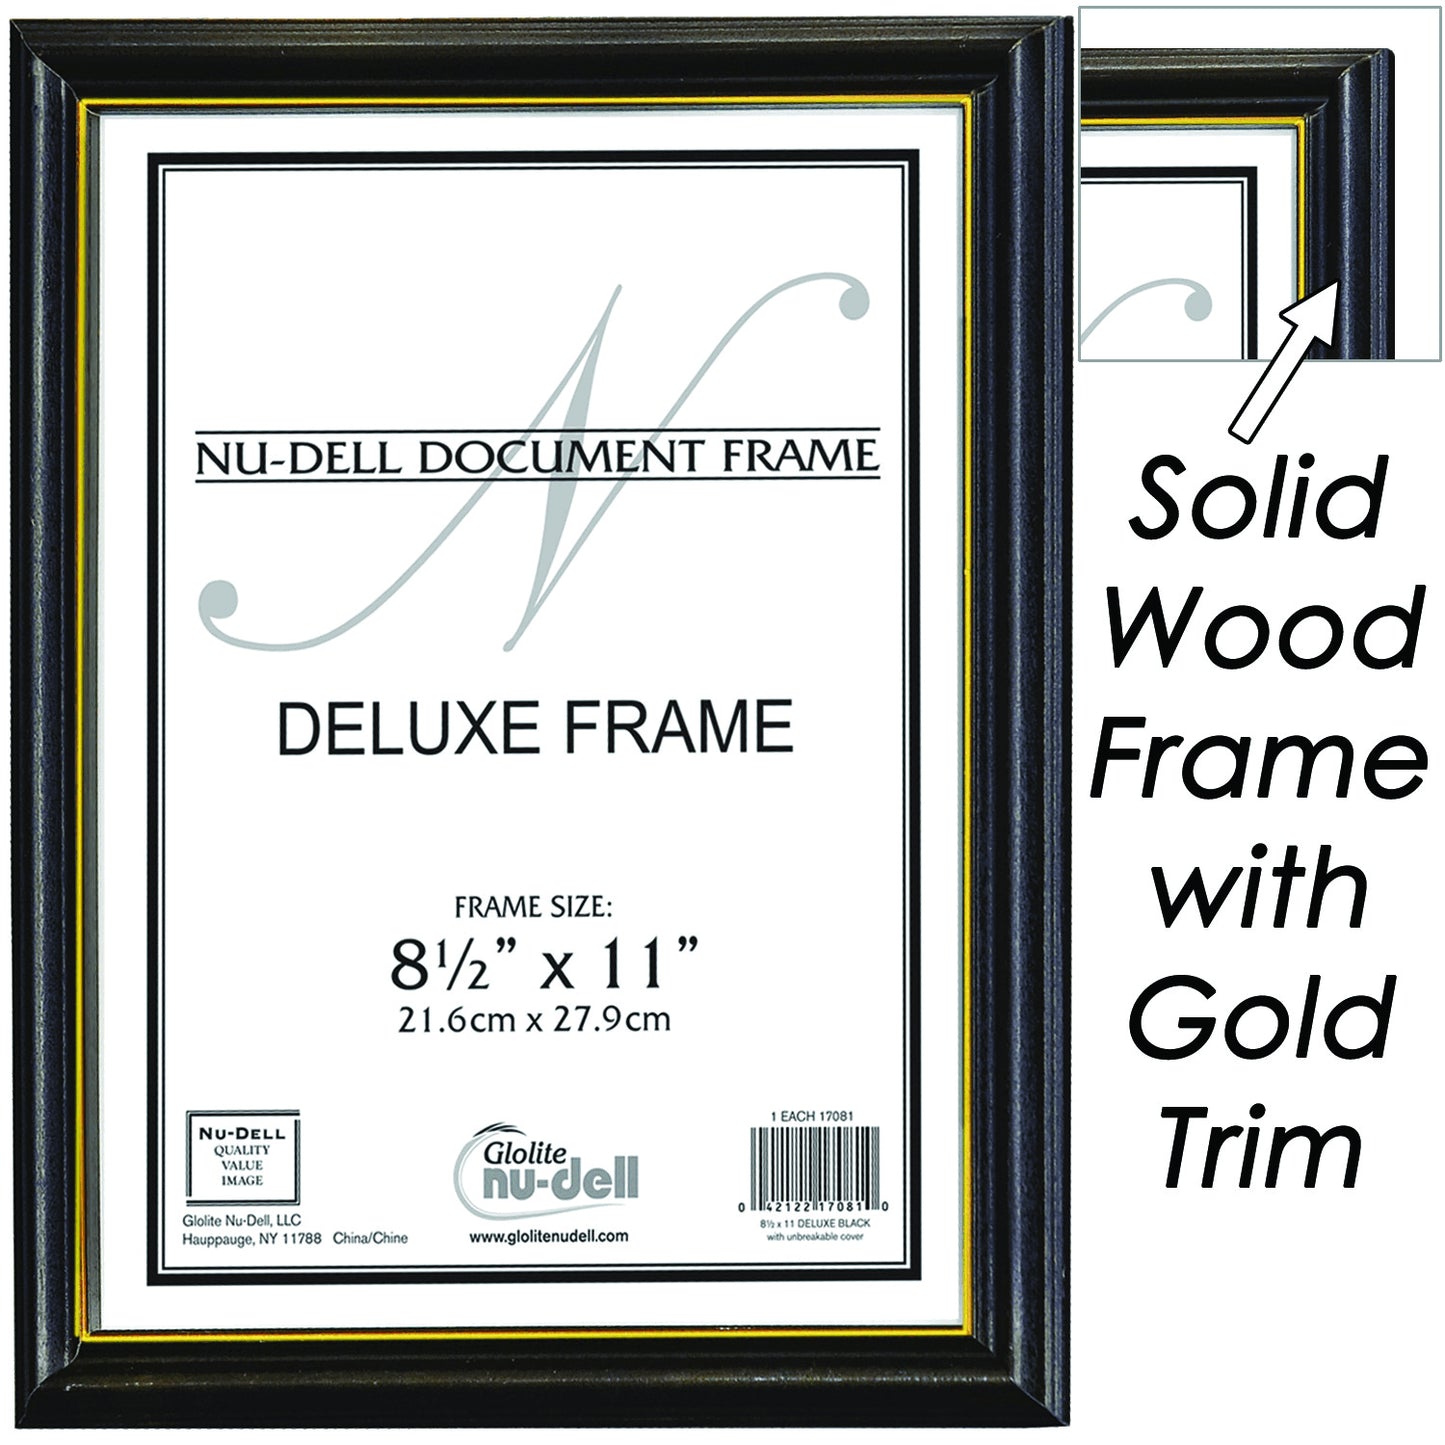 Deluxe Document Frame, 8.5" x 11", Black with Gold Trim